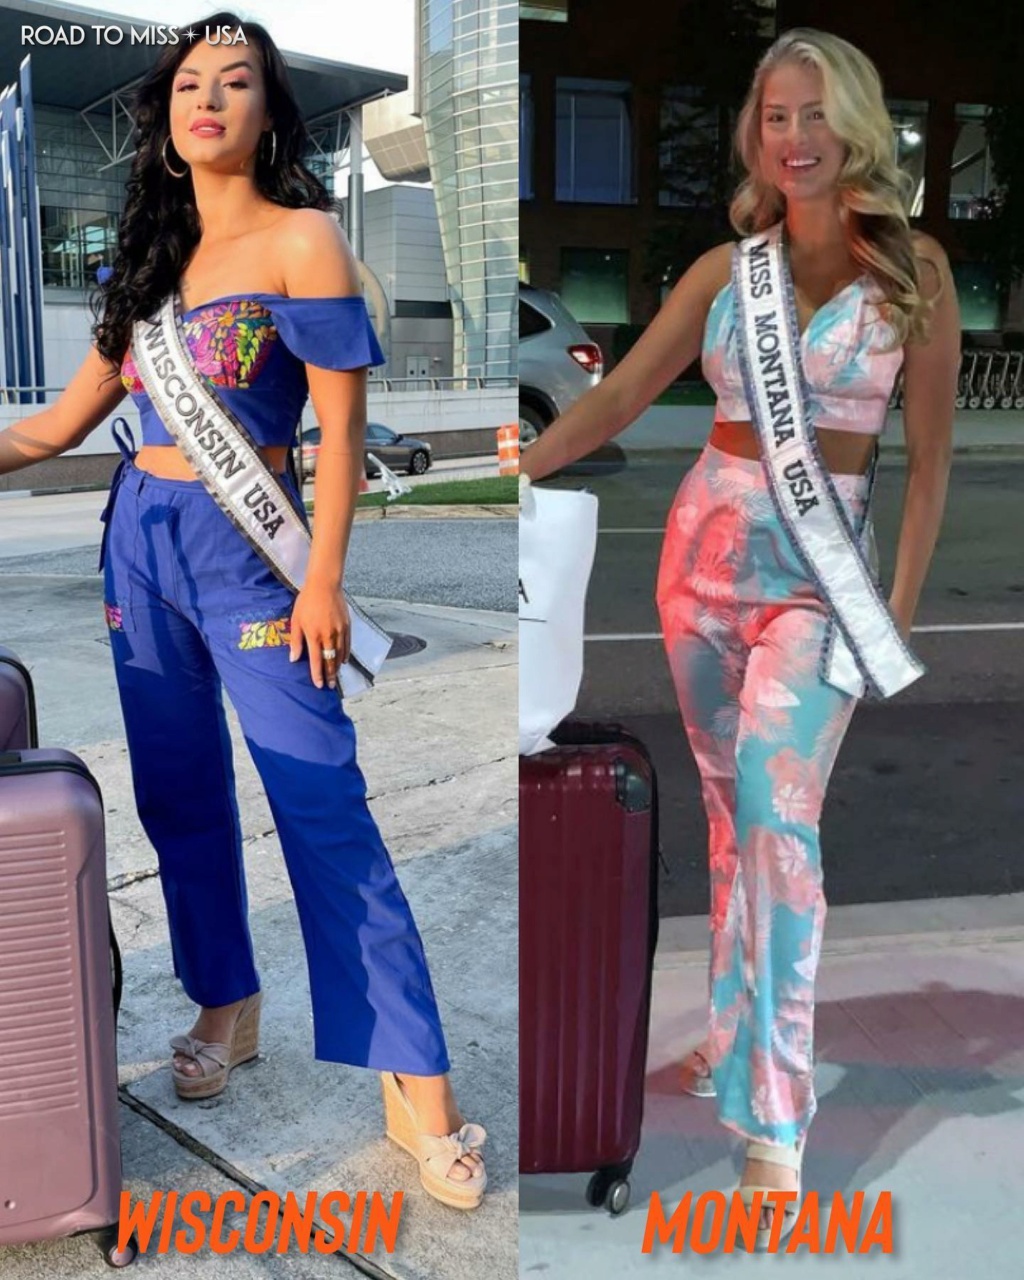 ROAD TO MISS USA 2021 is KENTUCKY! - Page 3 24192513